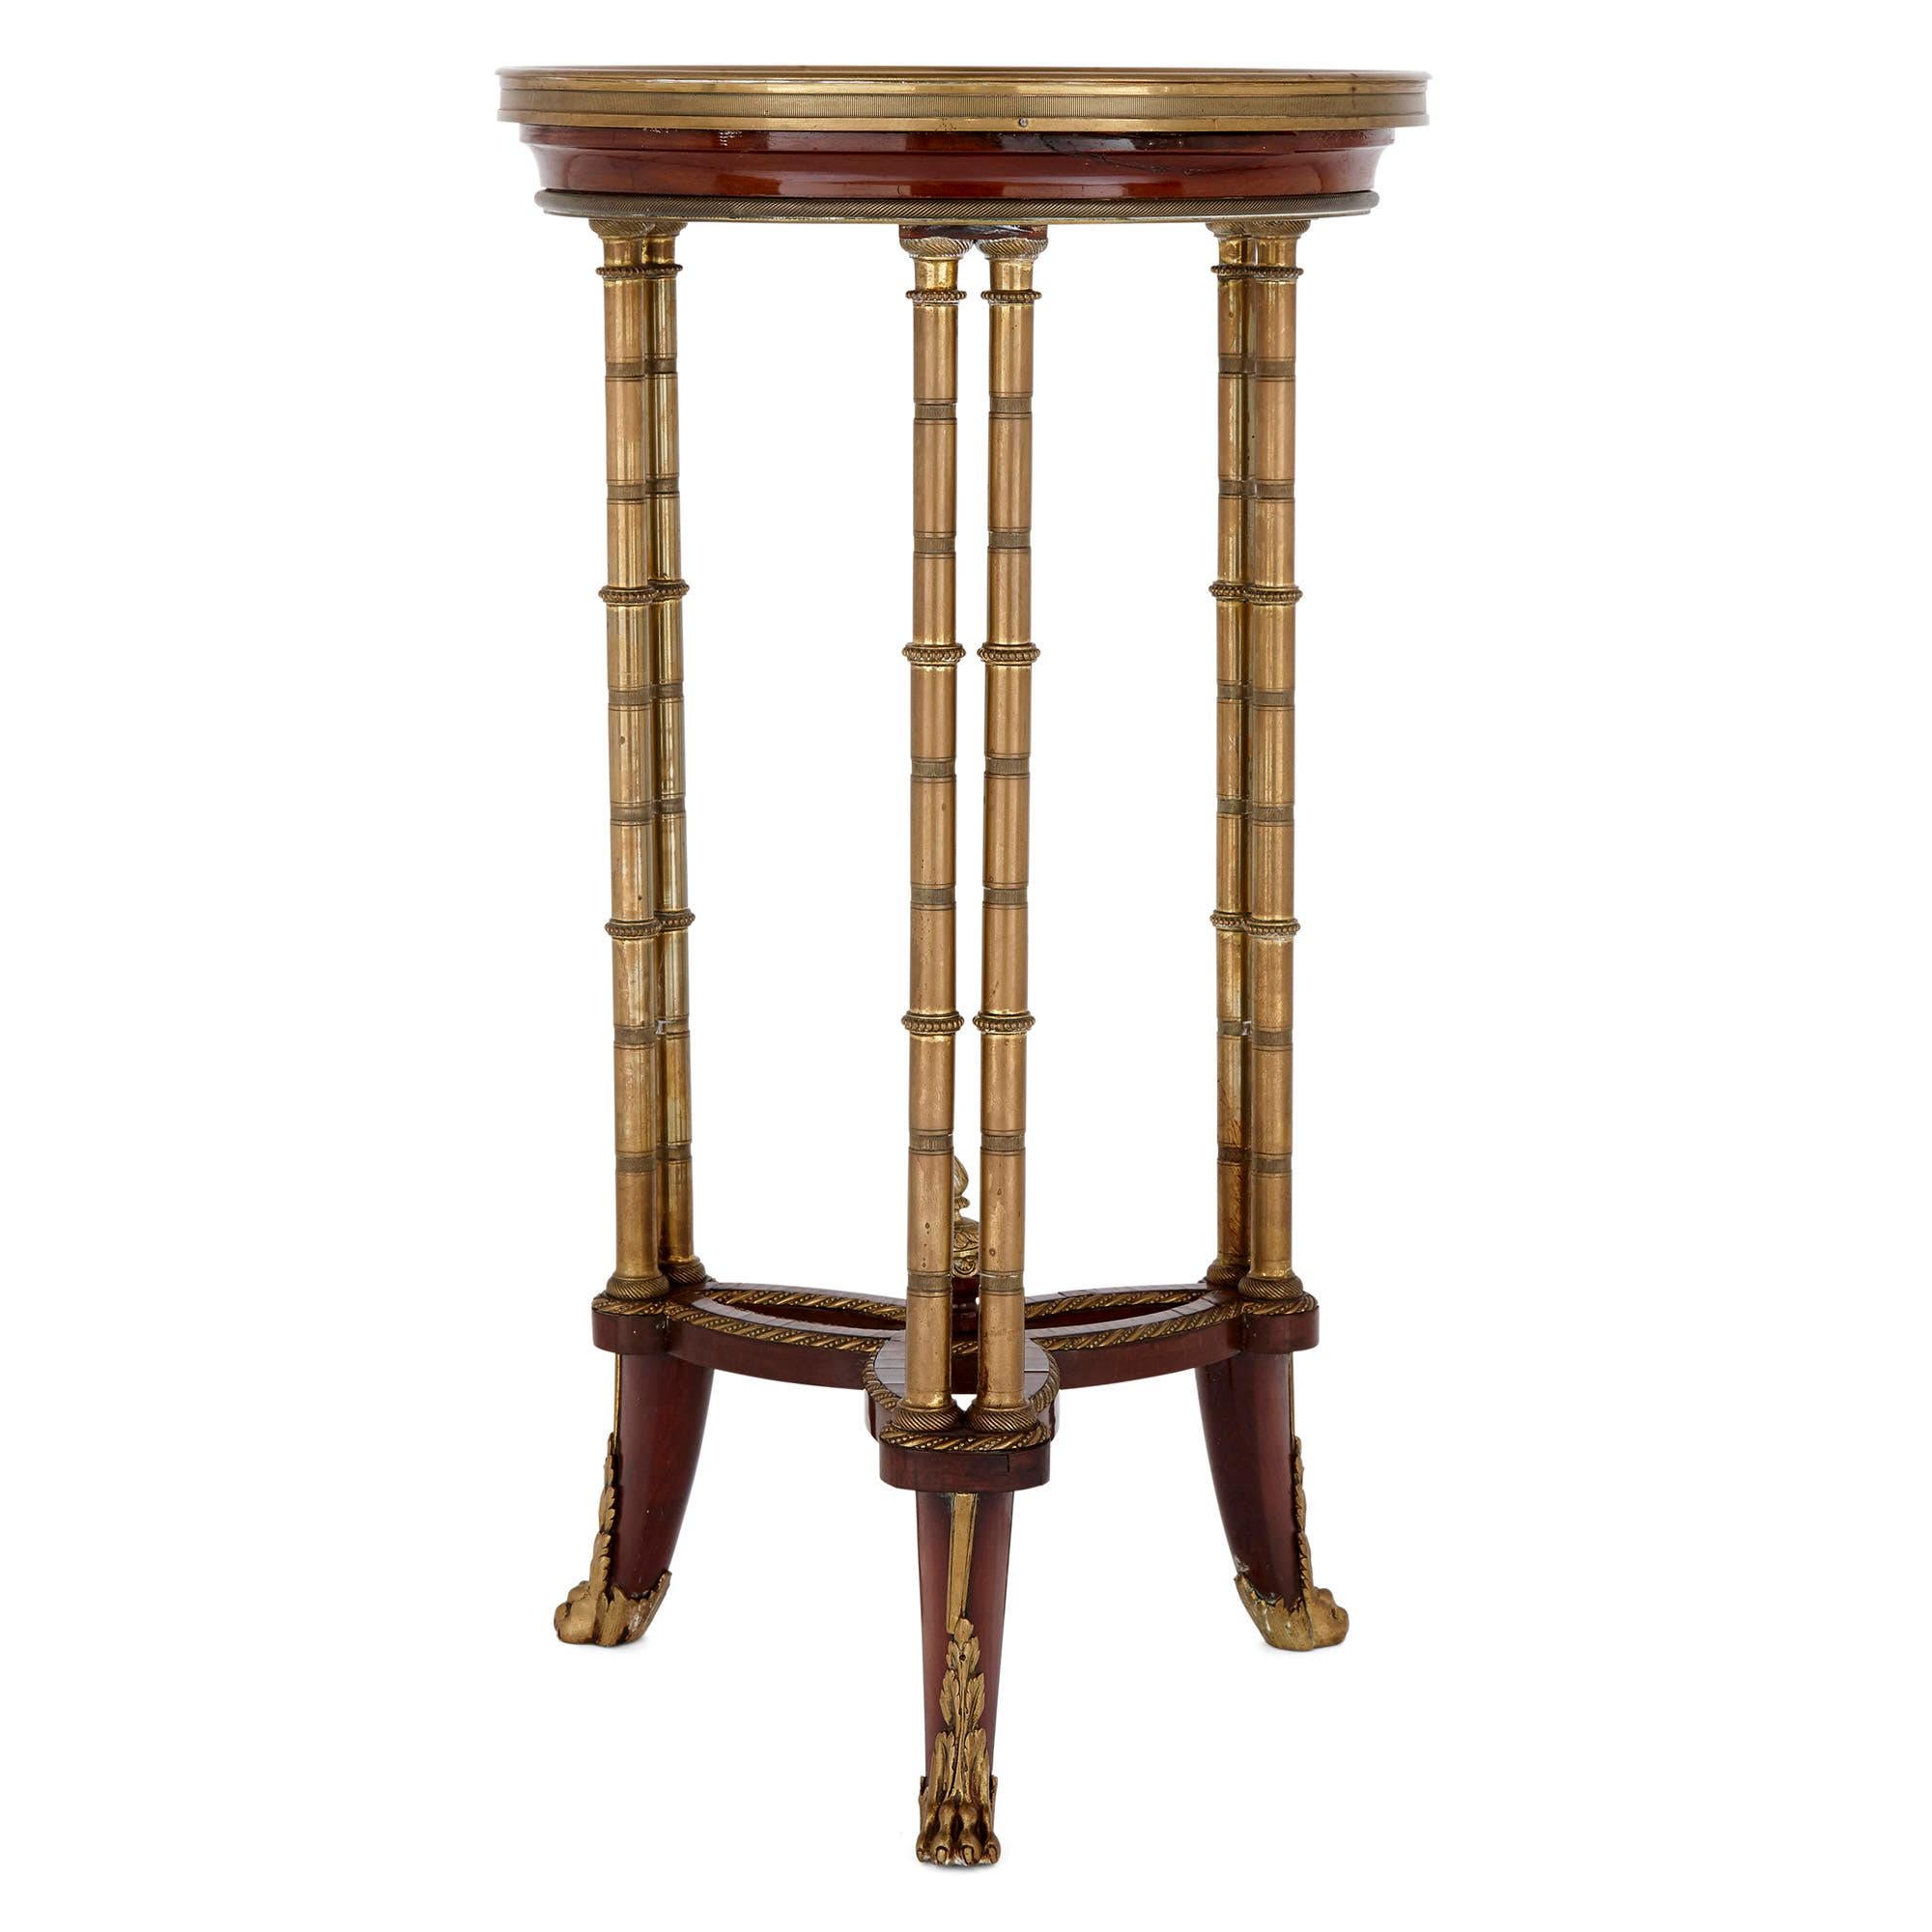 This circular side table is surmounted by an inset onyx top, which is bounded by a gilt bronze ring and is set above a mahogany apron. The table stands on three two-column gilt bronze legs, which in turn meet the ground on gilt bronze hoof feet. The